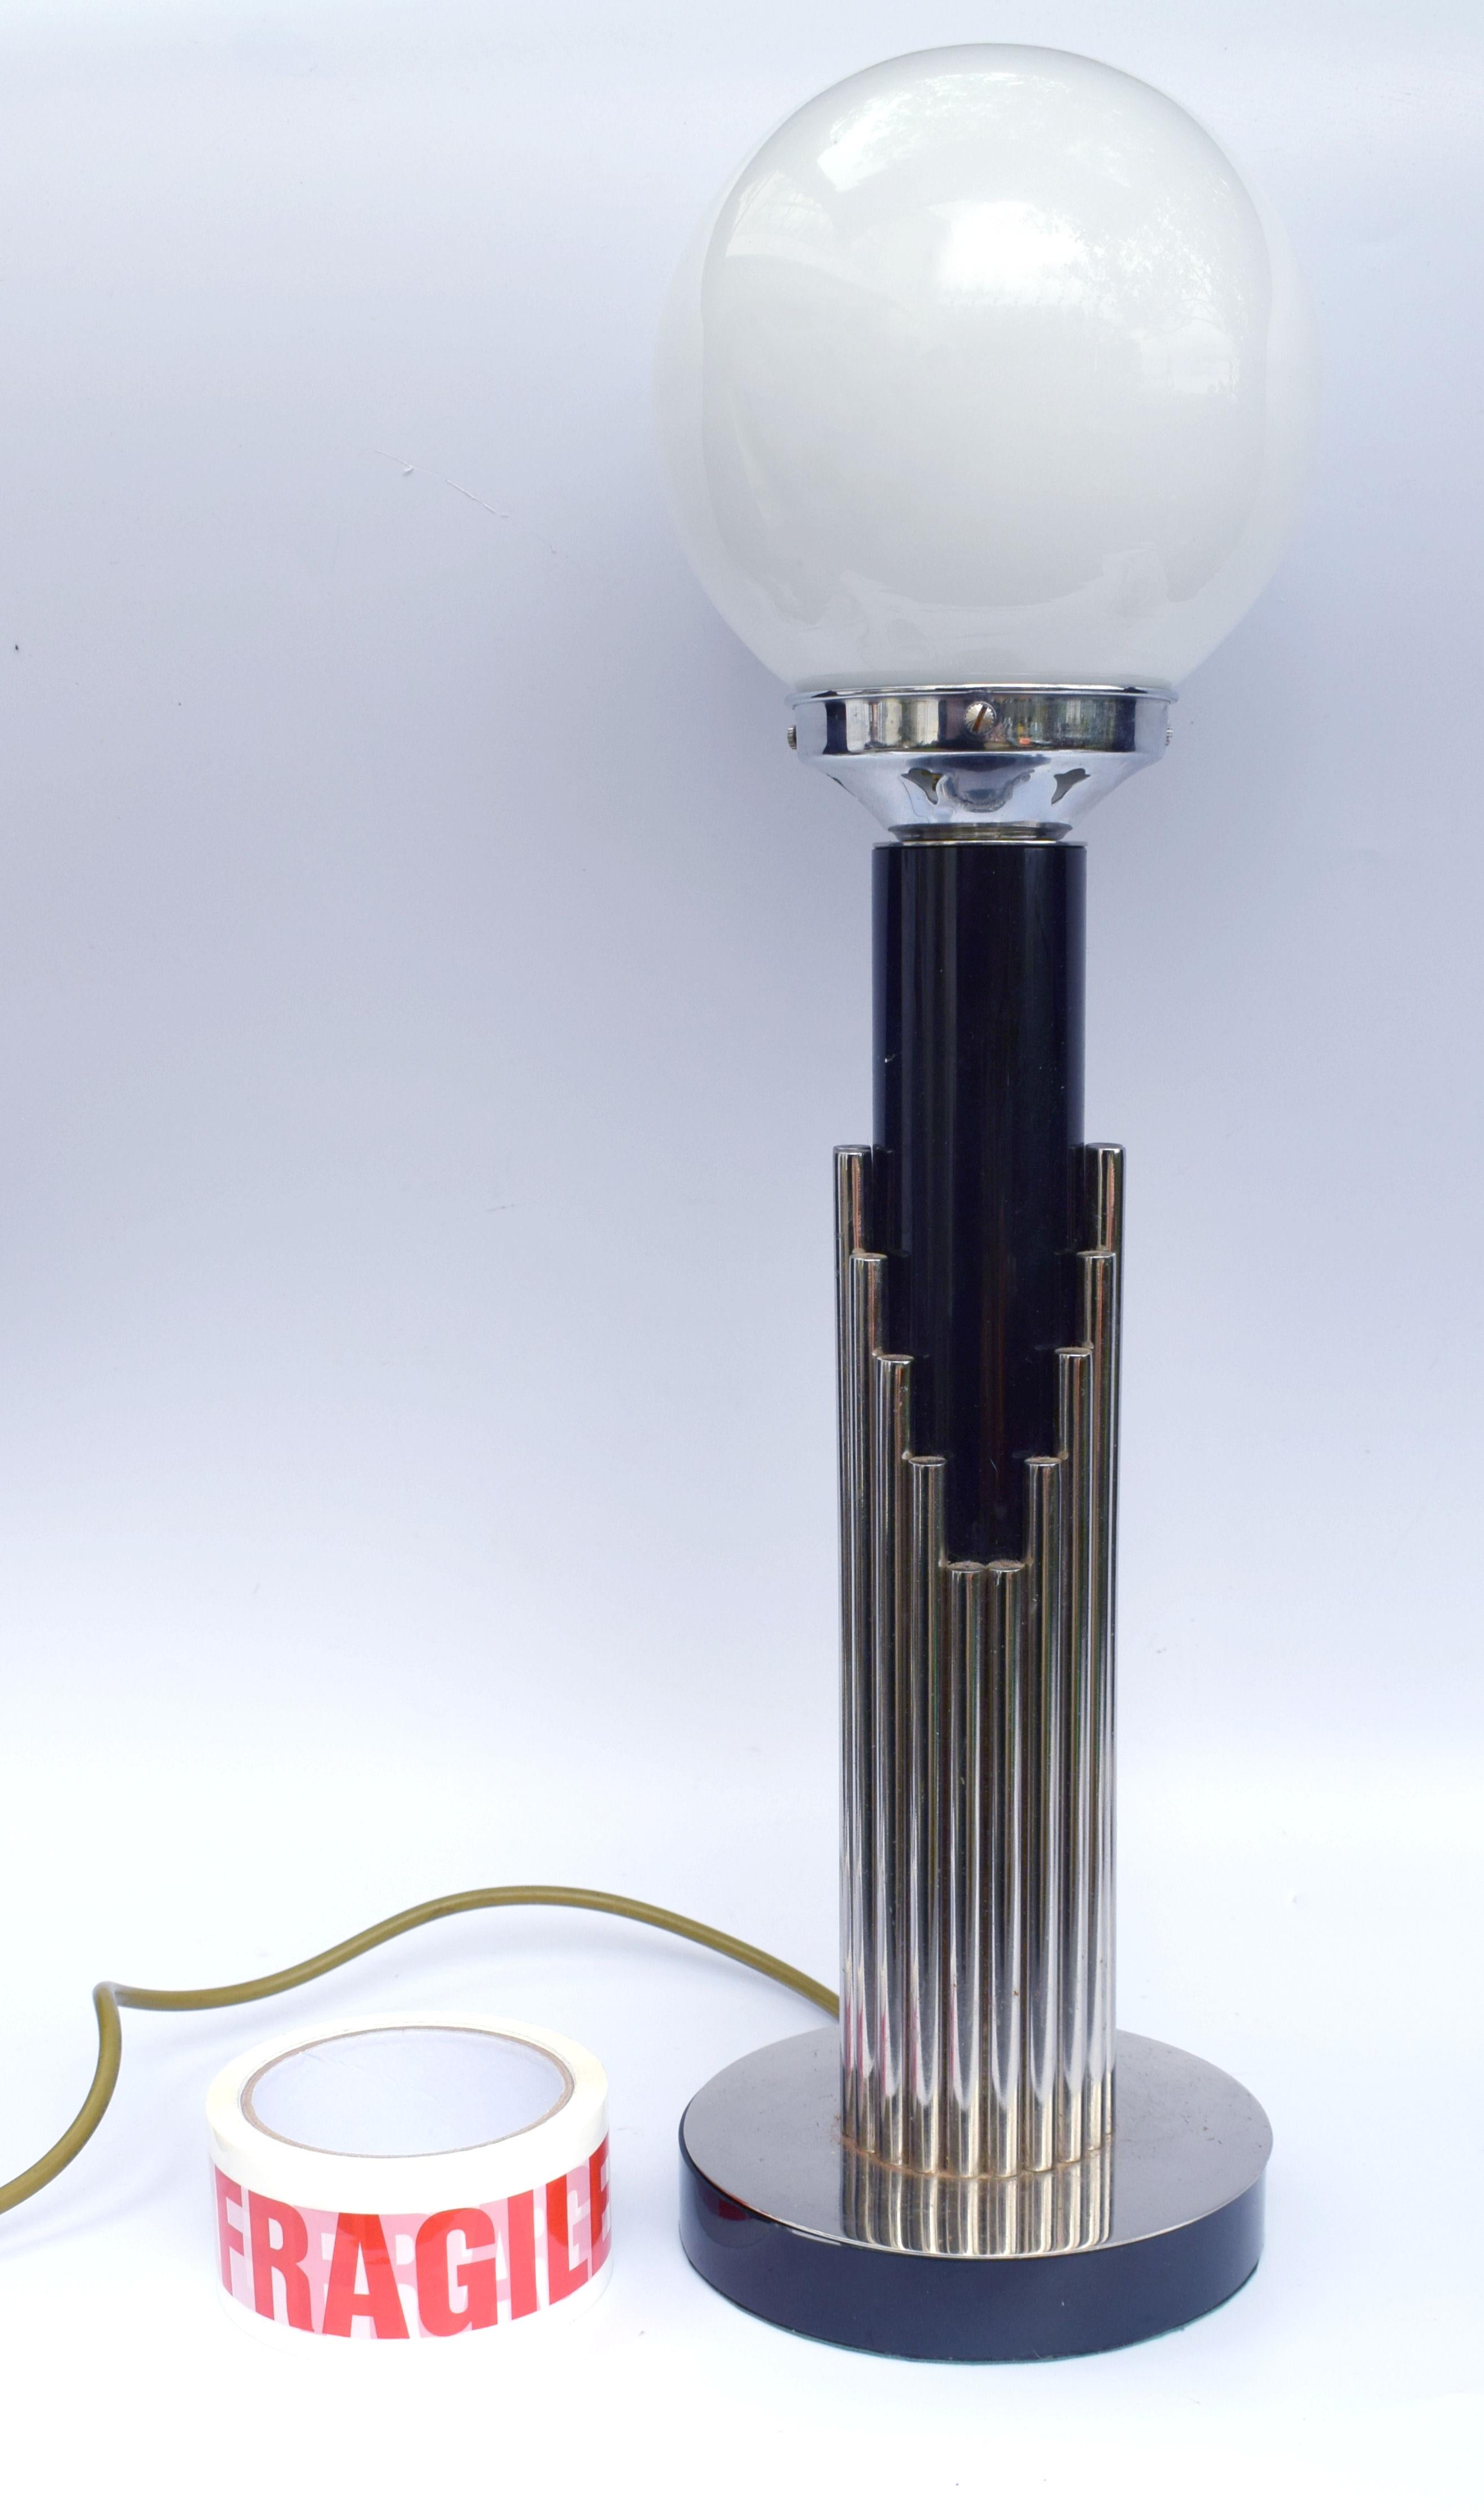 Offered for your consideration is this very tall English Art Deco style modernist table lamp. The chrome rods which surround the central ebonized column offer the look of a skyscraper skyline at night. A chrome gallery and milk white glass globe